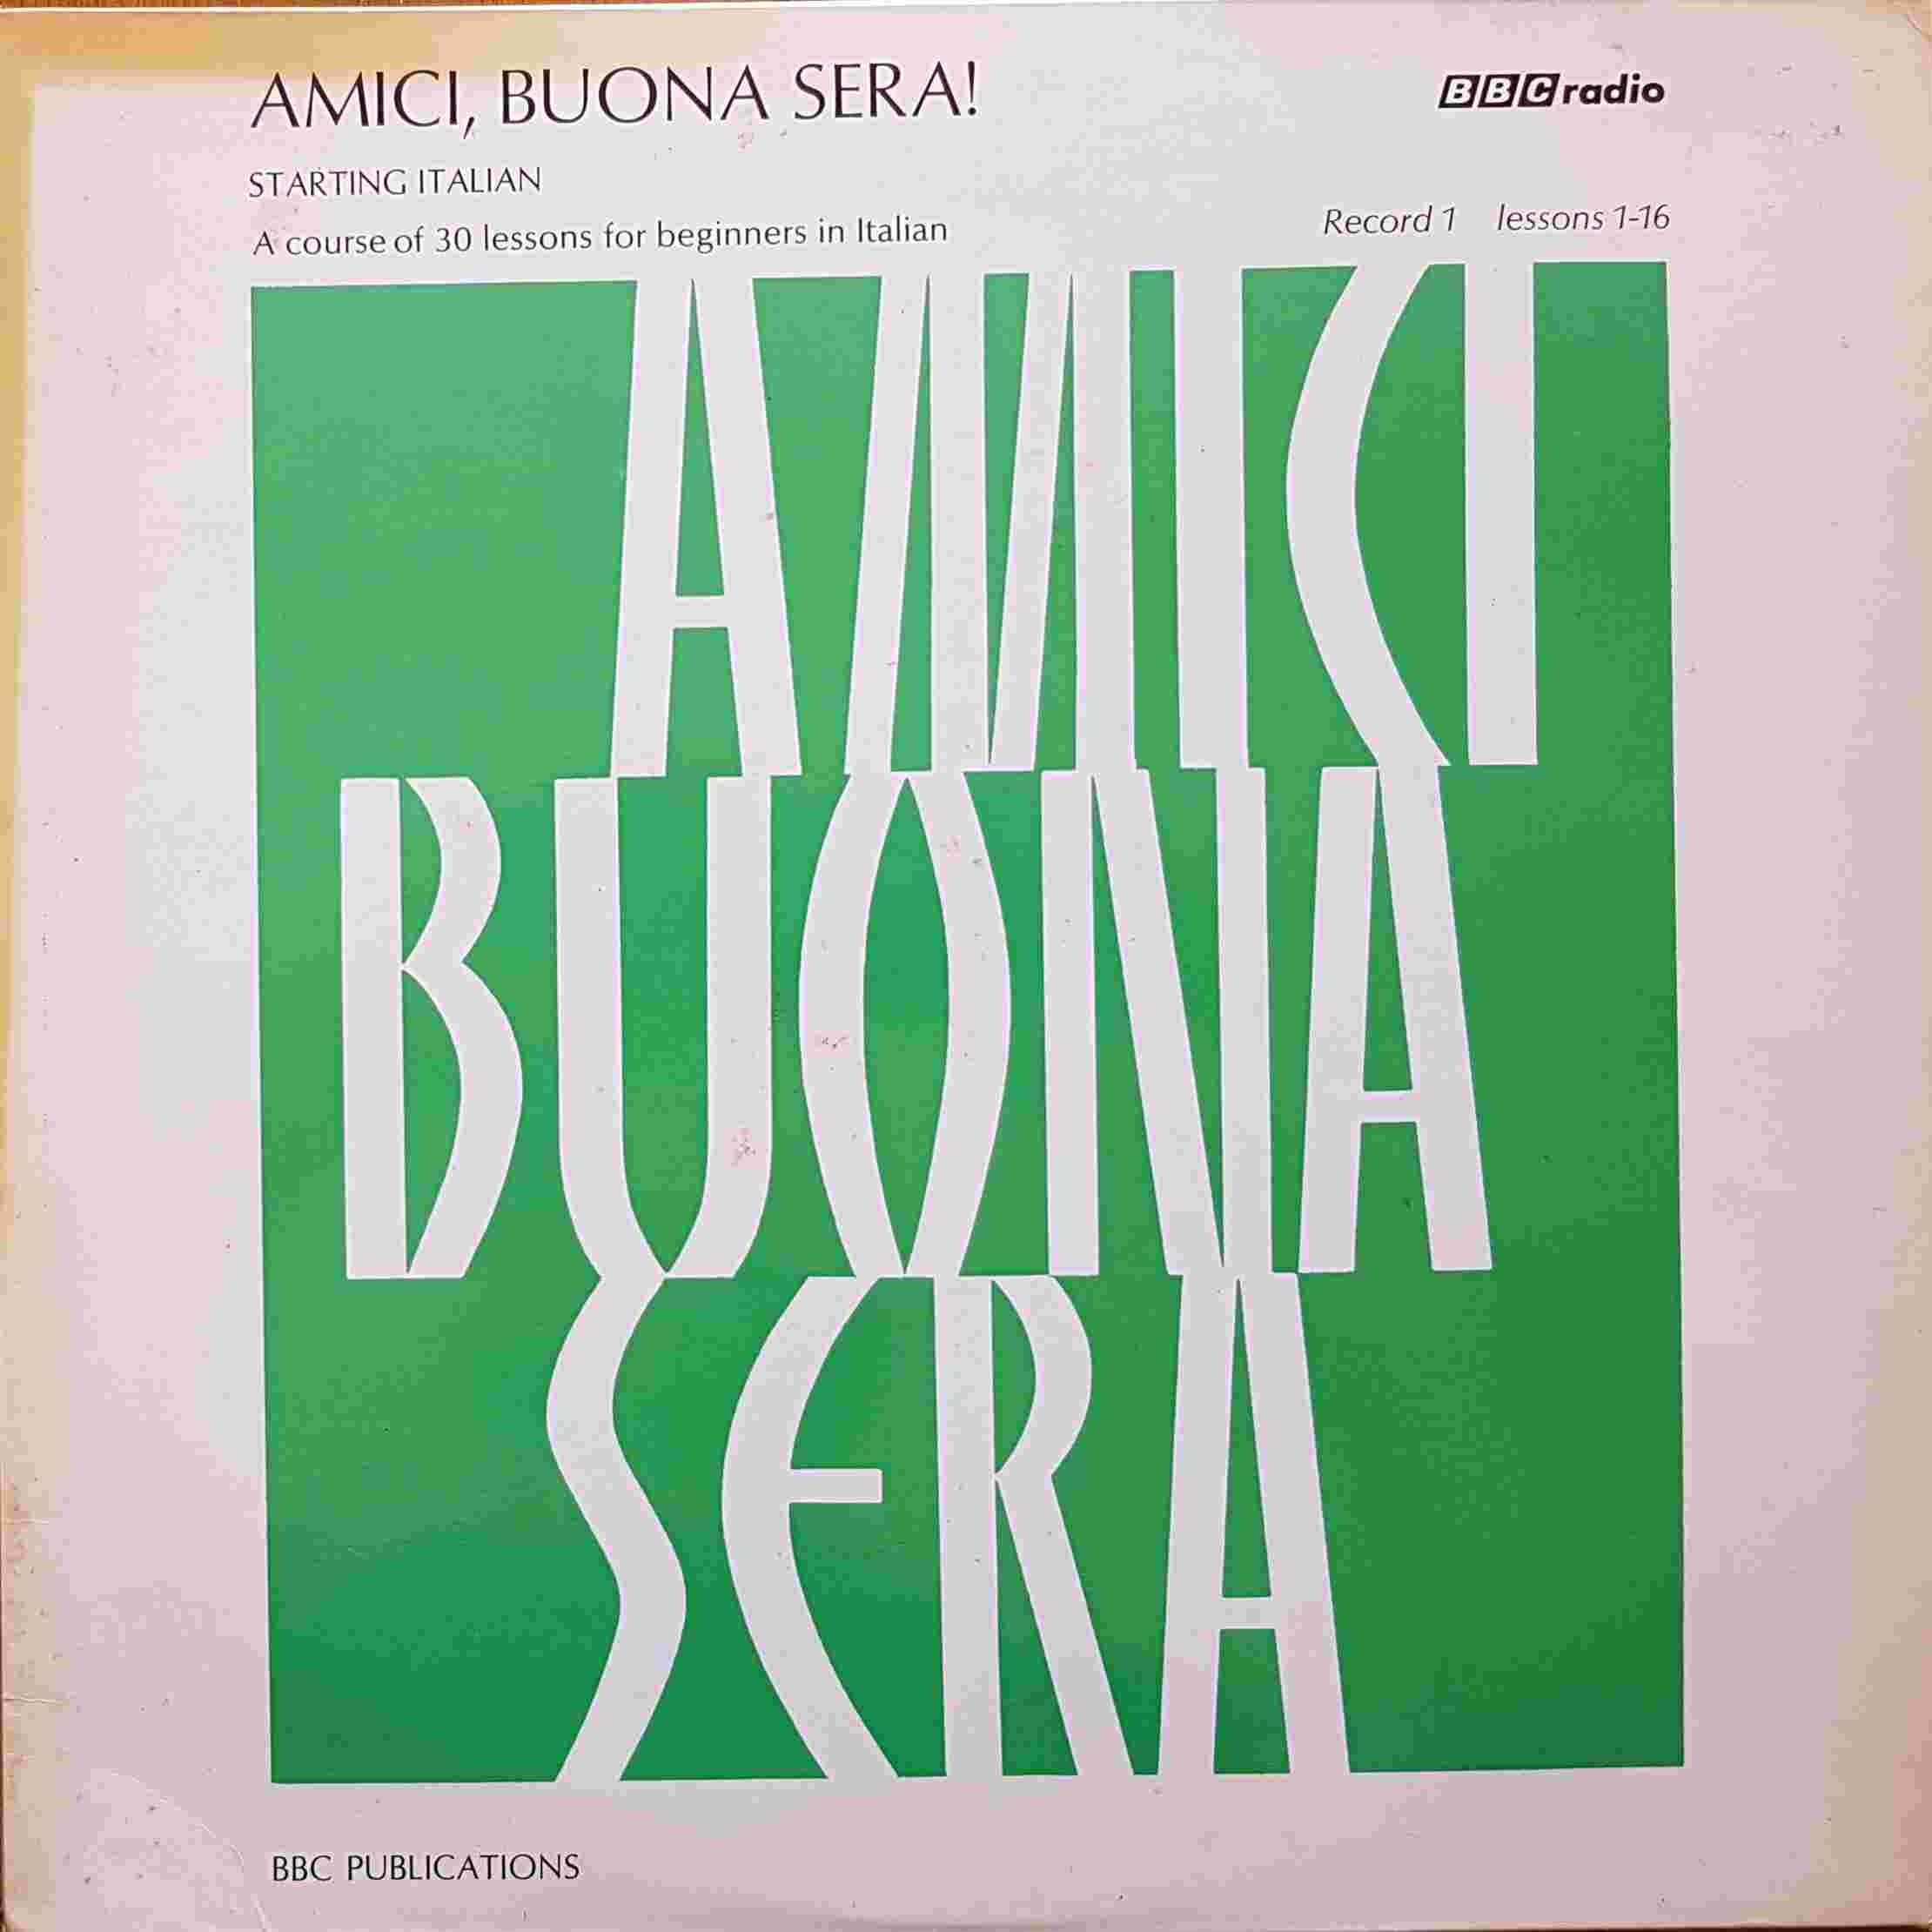 Picture of OP 145/146 Amici, Buona sera! - Starting Italian - A course of 30 lessons for beginners in Italian -  Record 1 - Lessons 1 - 16 by artist Hugh Shankland / Ernesto Mussi from the BBC albums - Records and Tapes library